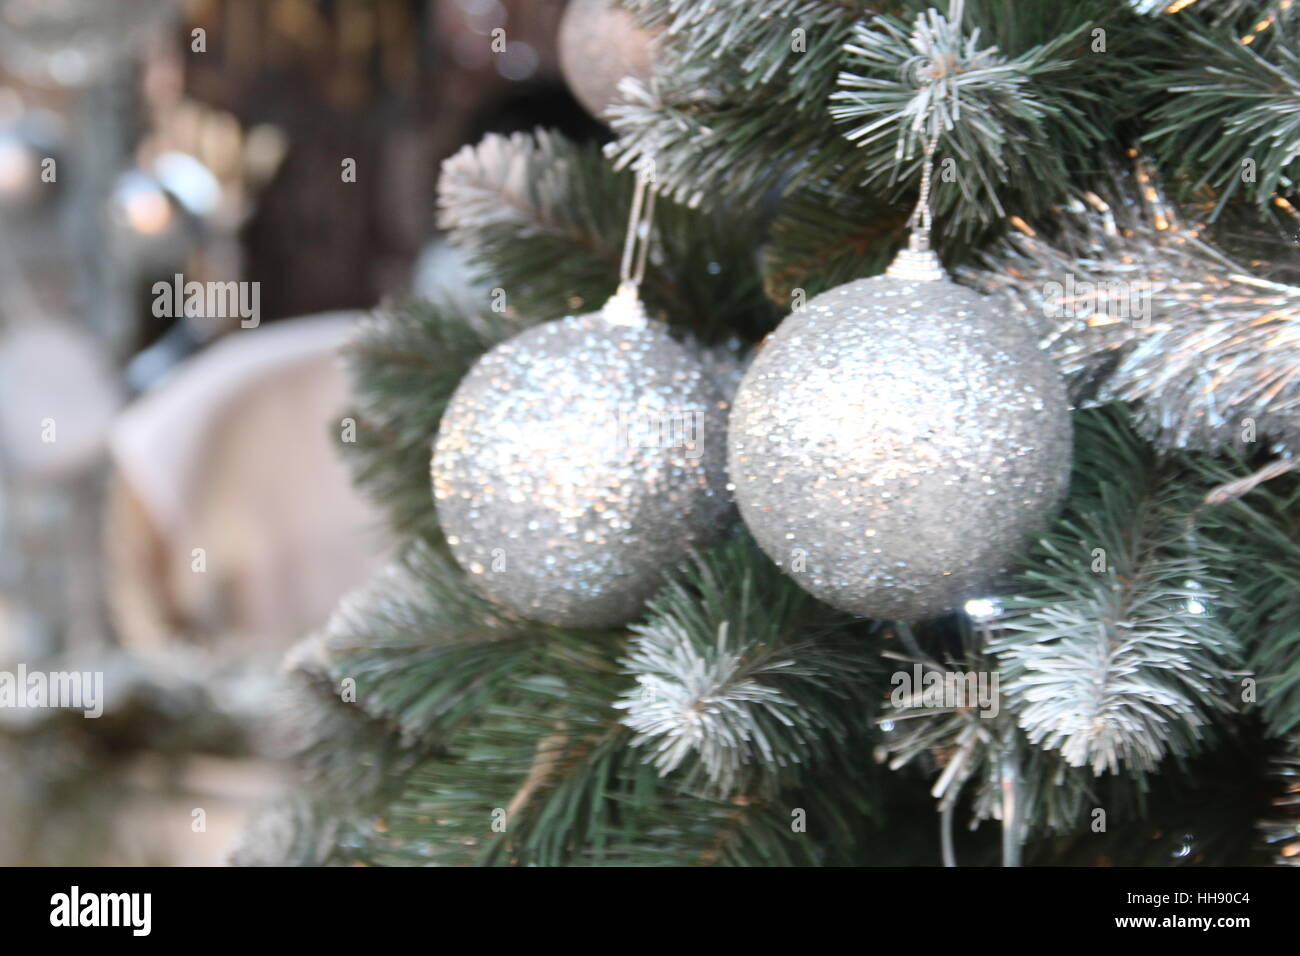 Decorations for Christmas and New Year day. Silver Christmas balls on tree branches Stock Photo